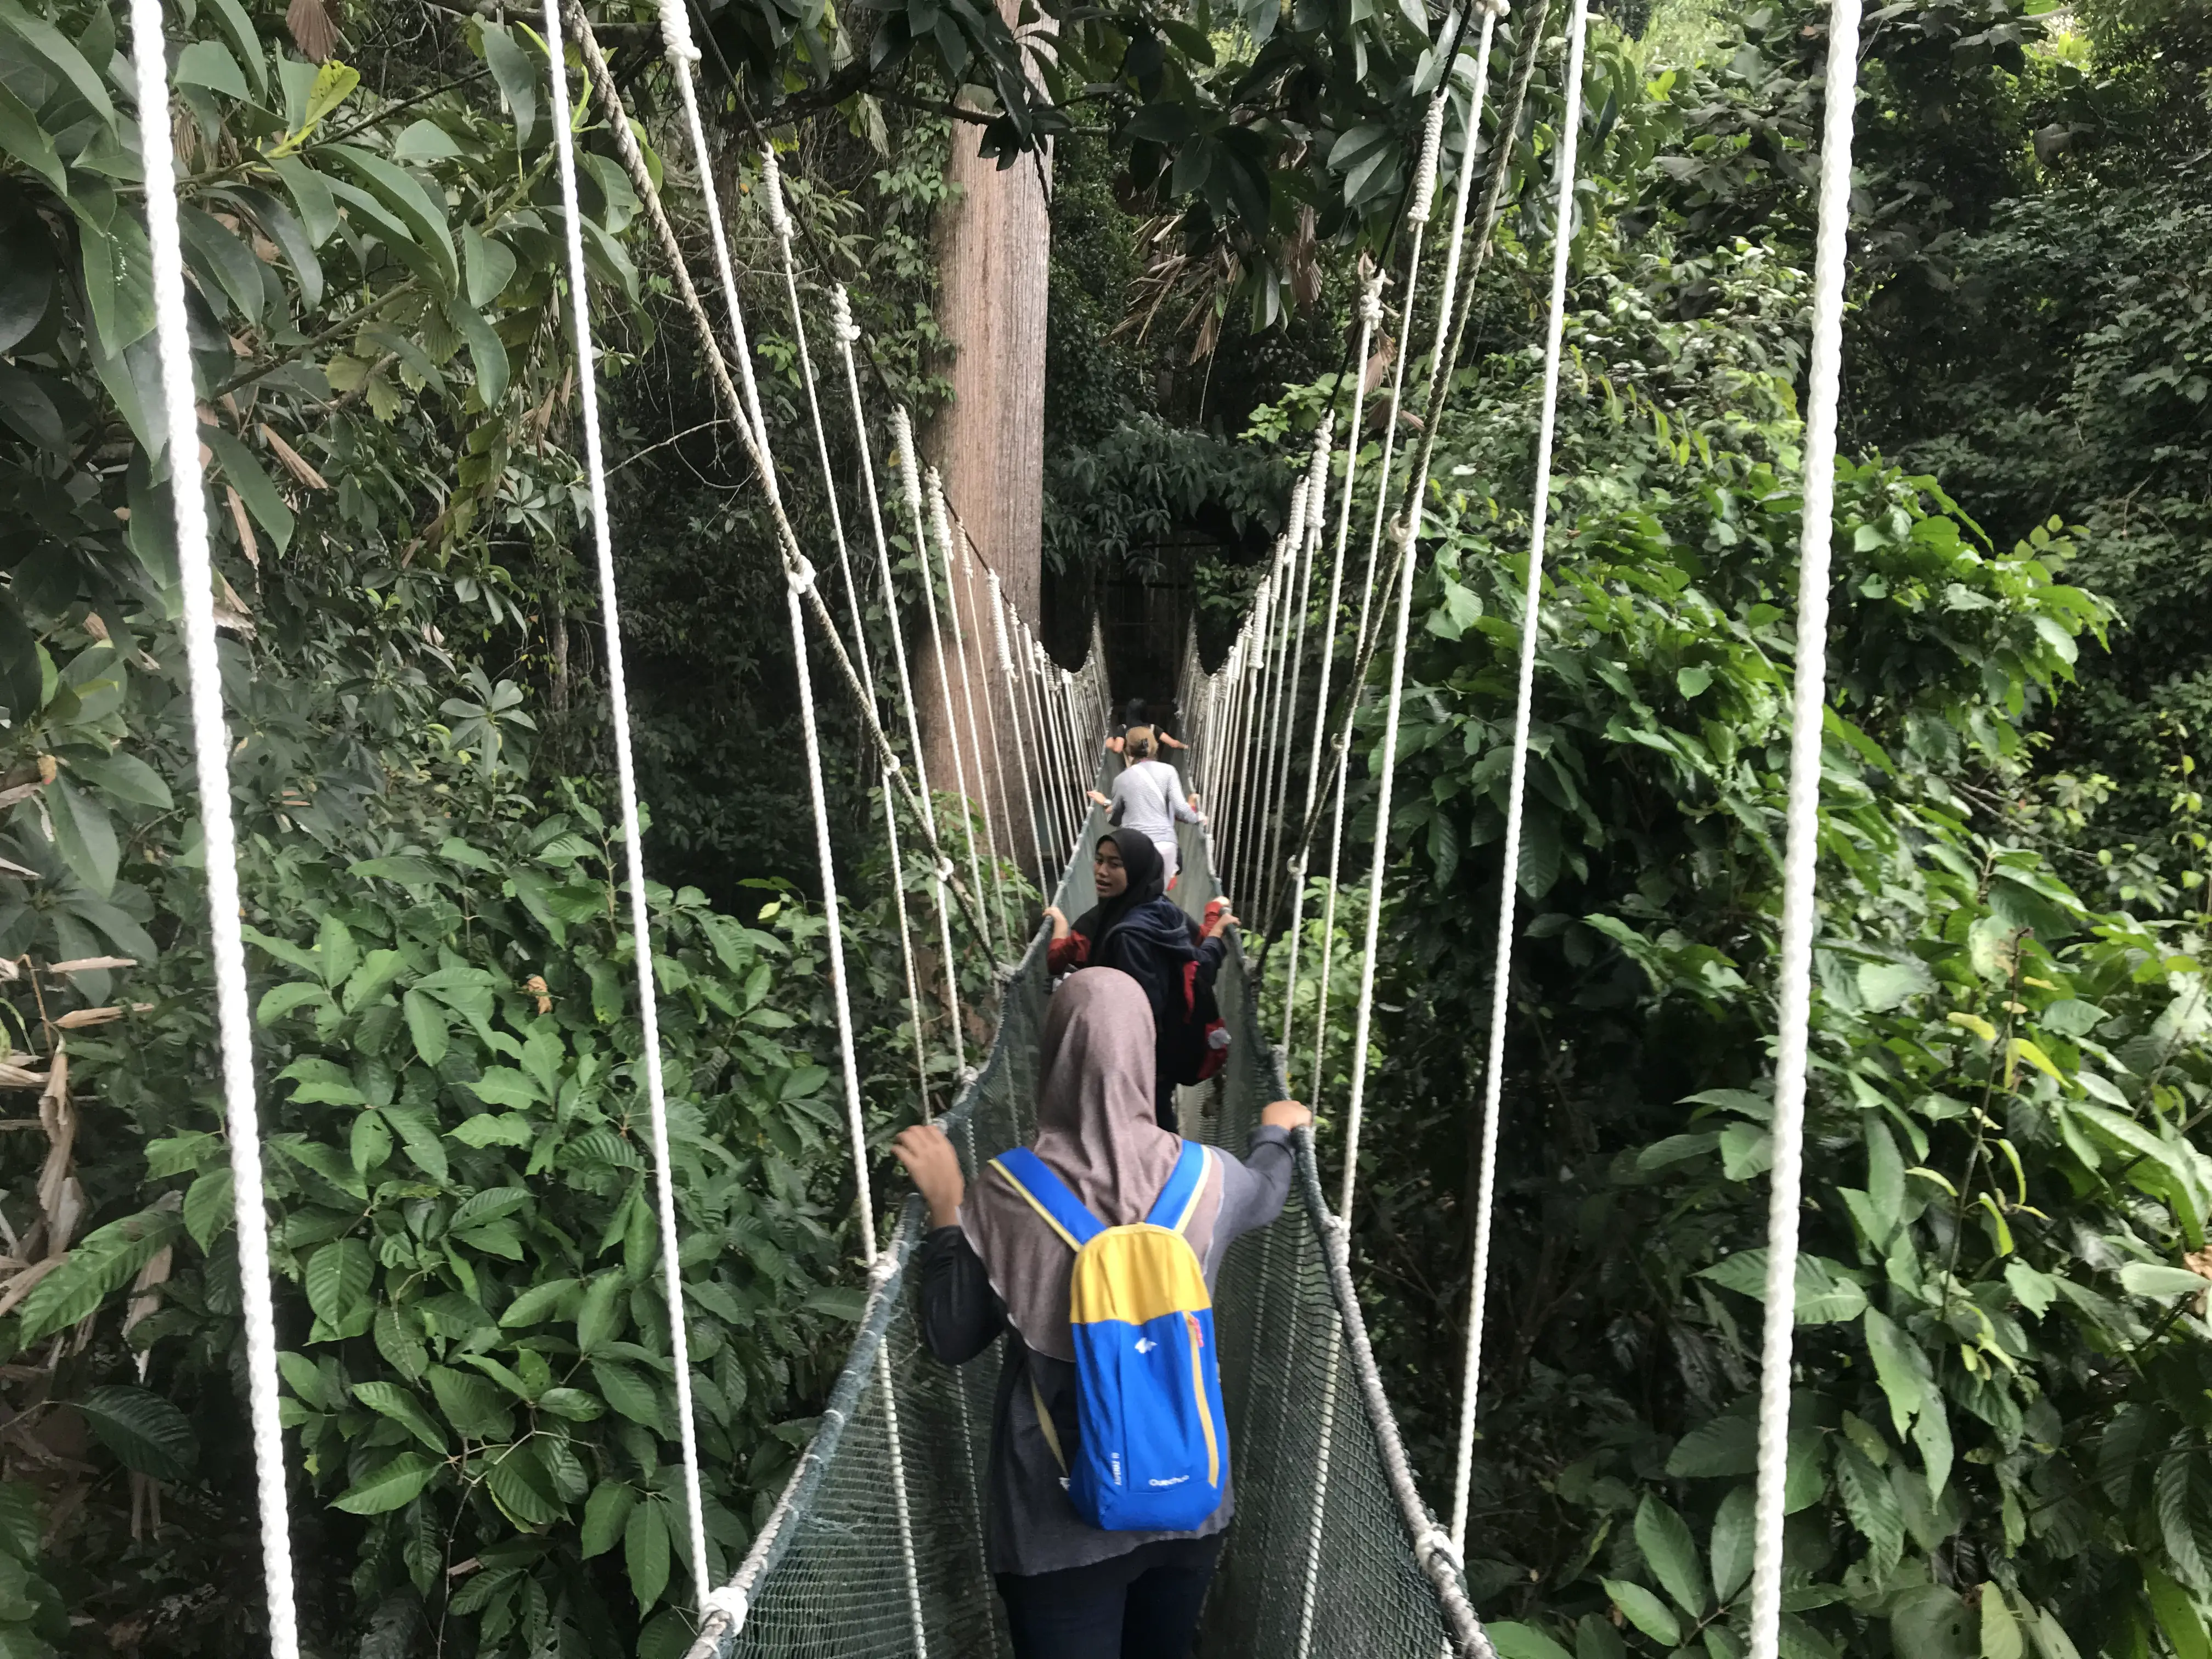 Canopy walkway at Poring Hot Springs, Borneo, Malaysia